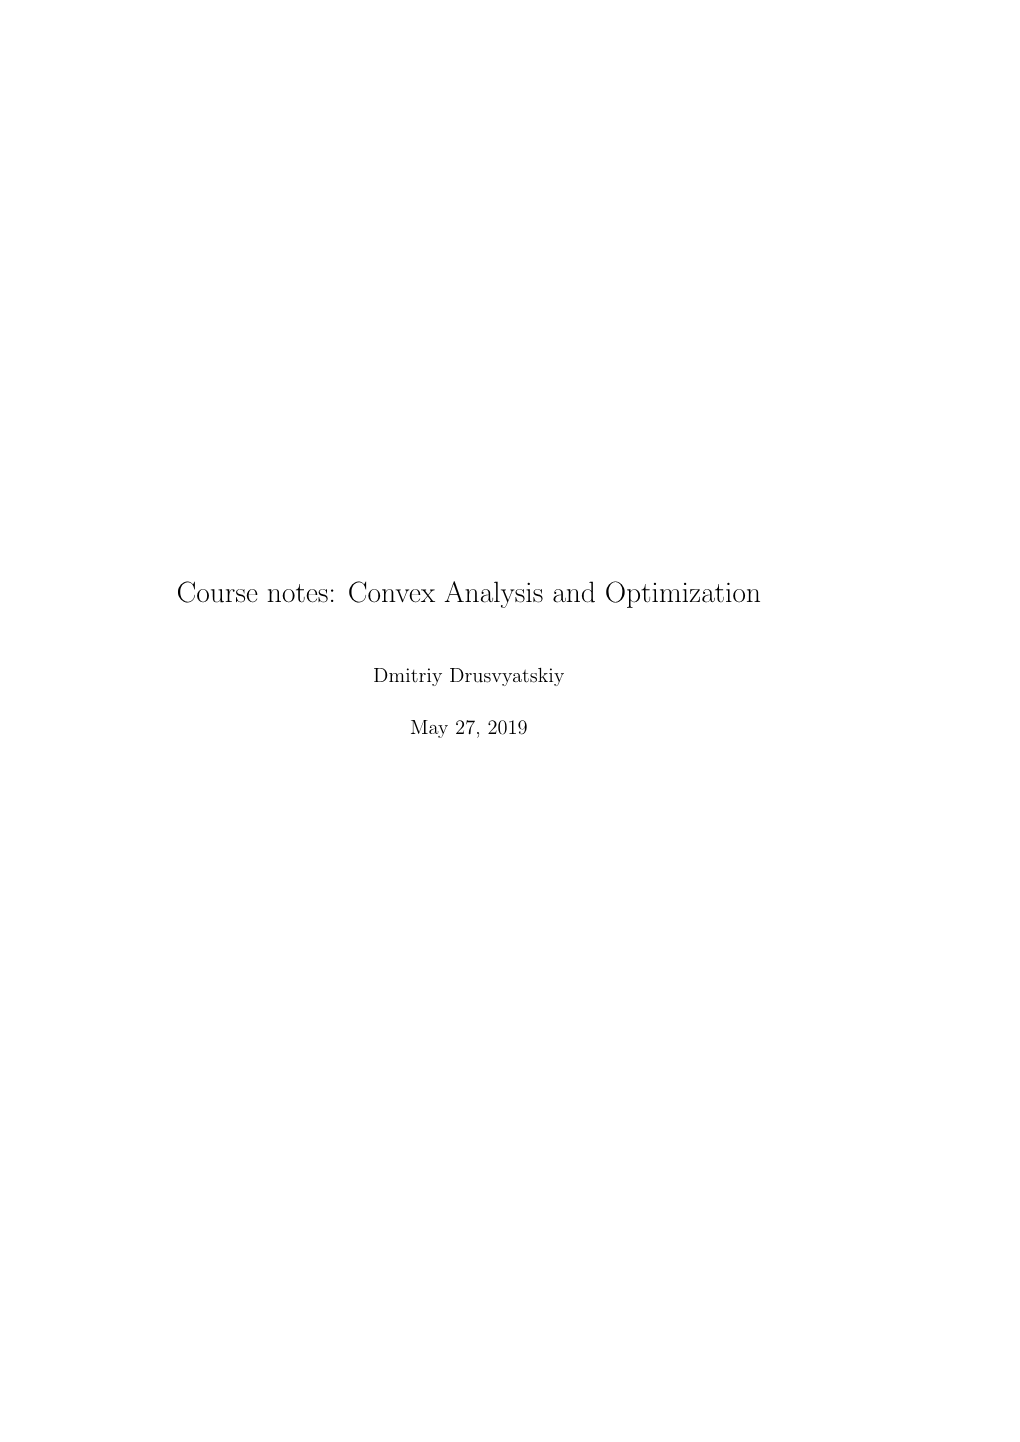 Course Notes: Convex Analysis and Optimization